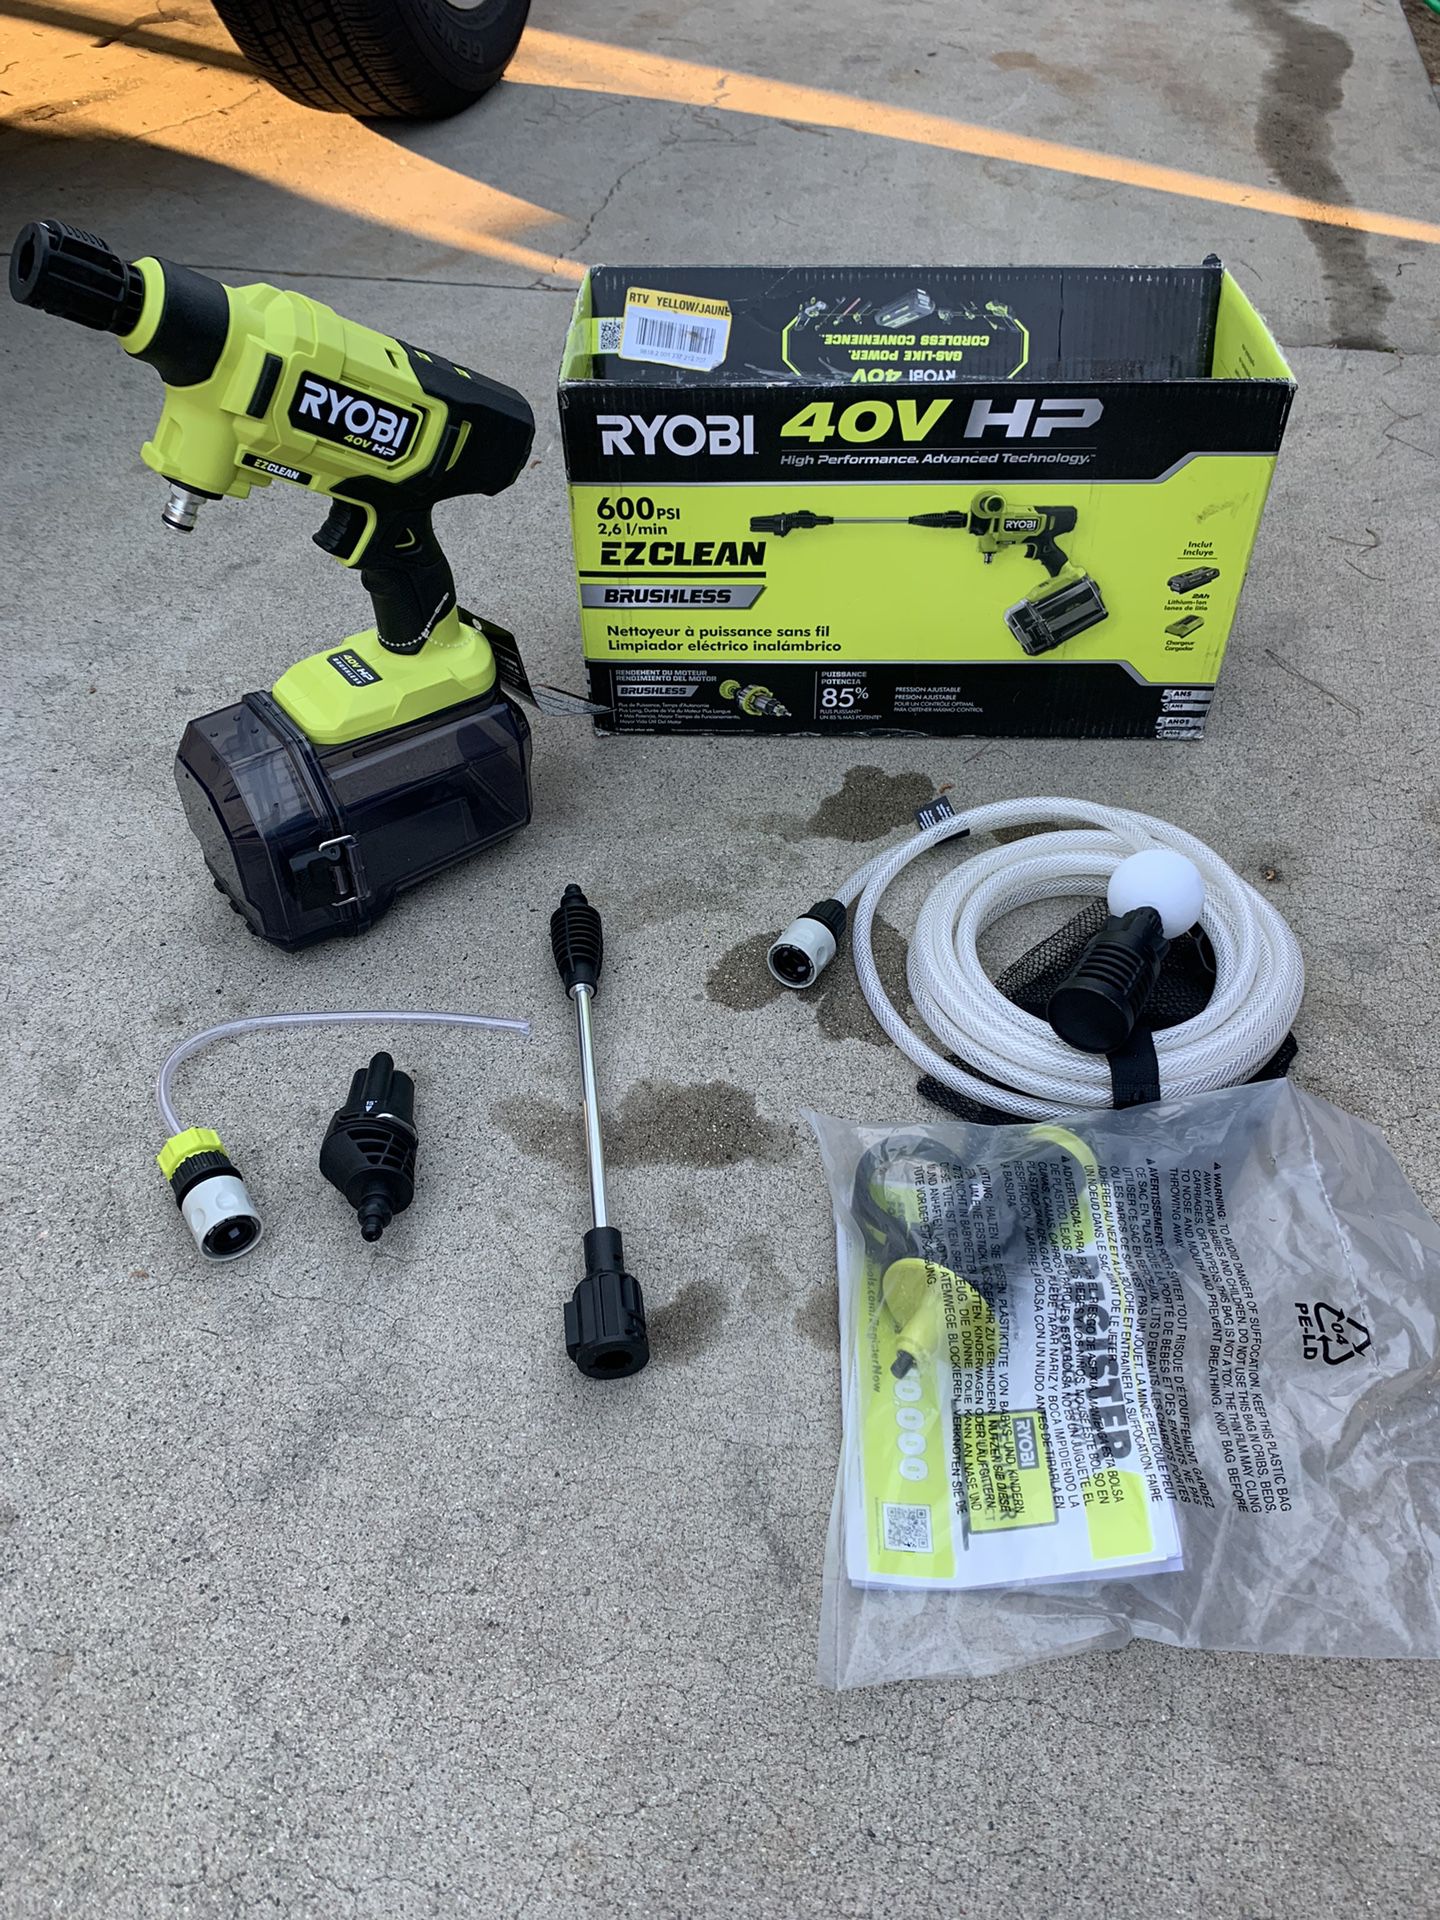 RYOBI 40V HP Brushless EZClean 600 PSI 0.7 GPM Cold Water Electric Power Cleaner (Tool-Only)